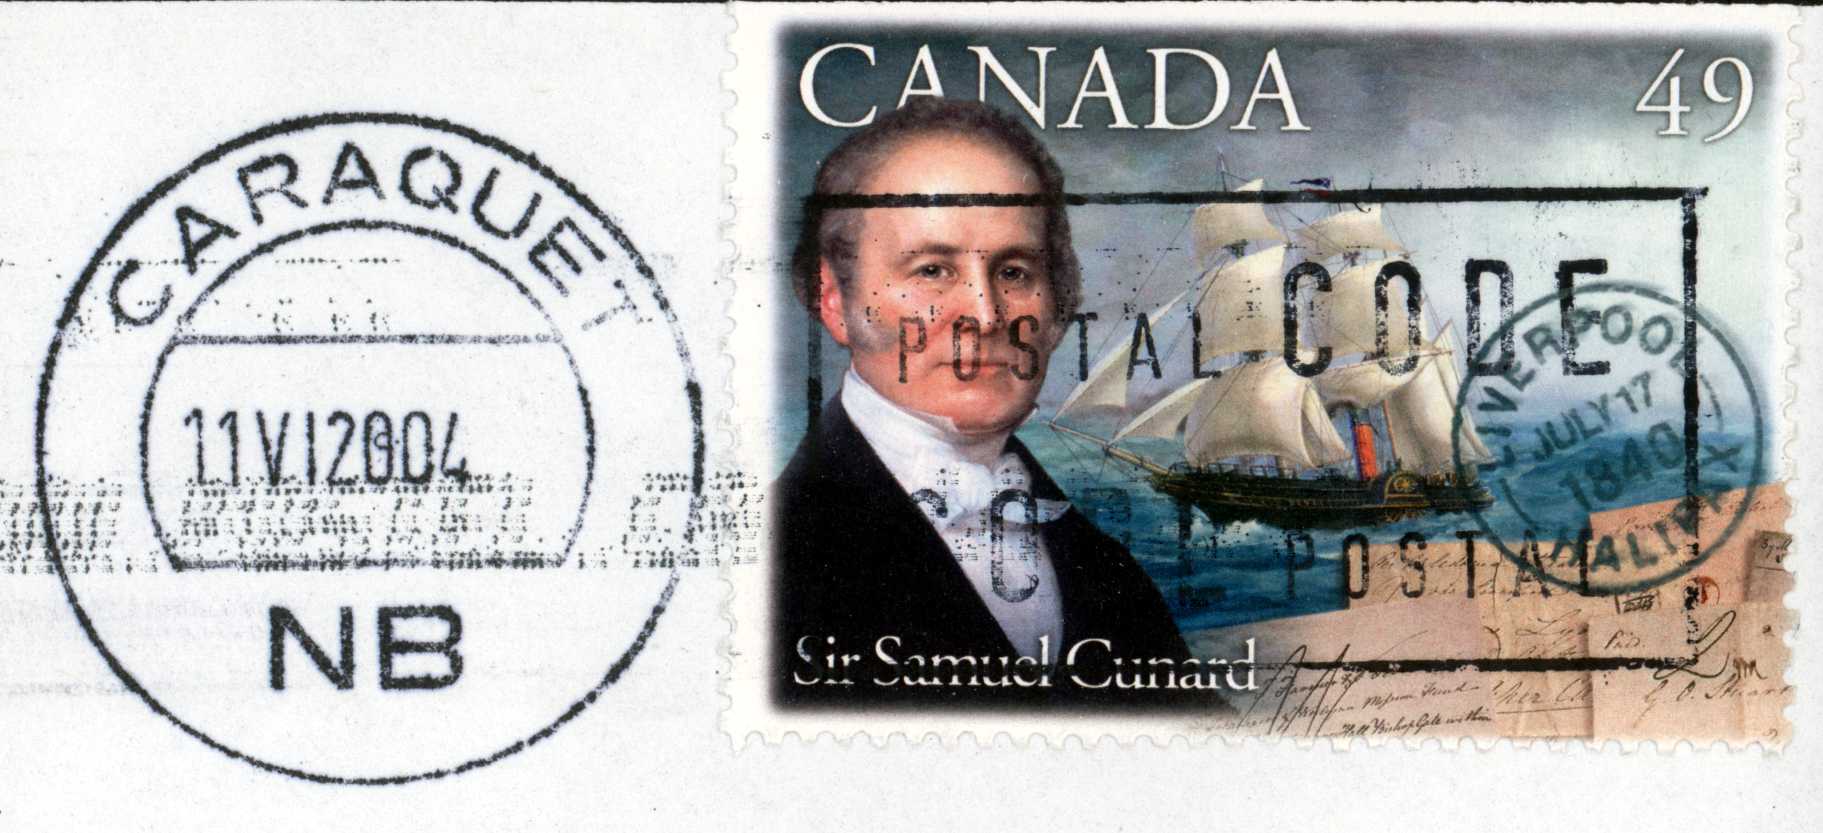 Postmark from Caraque, NB